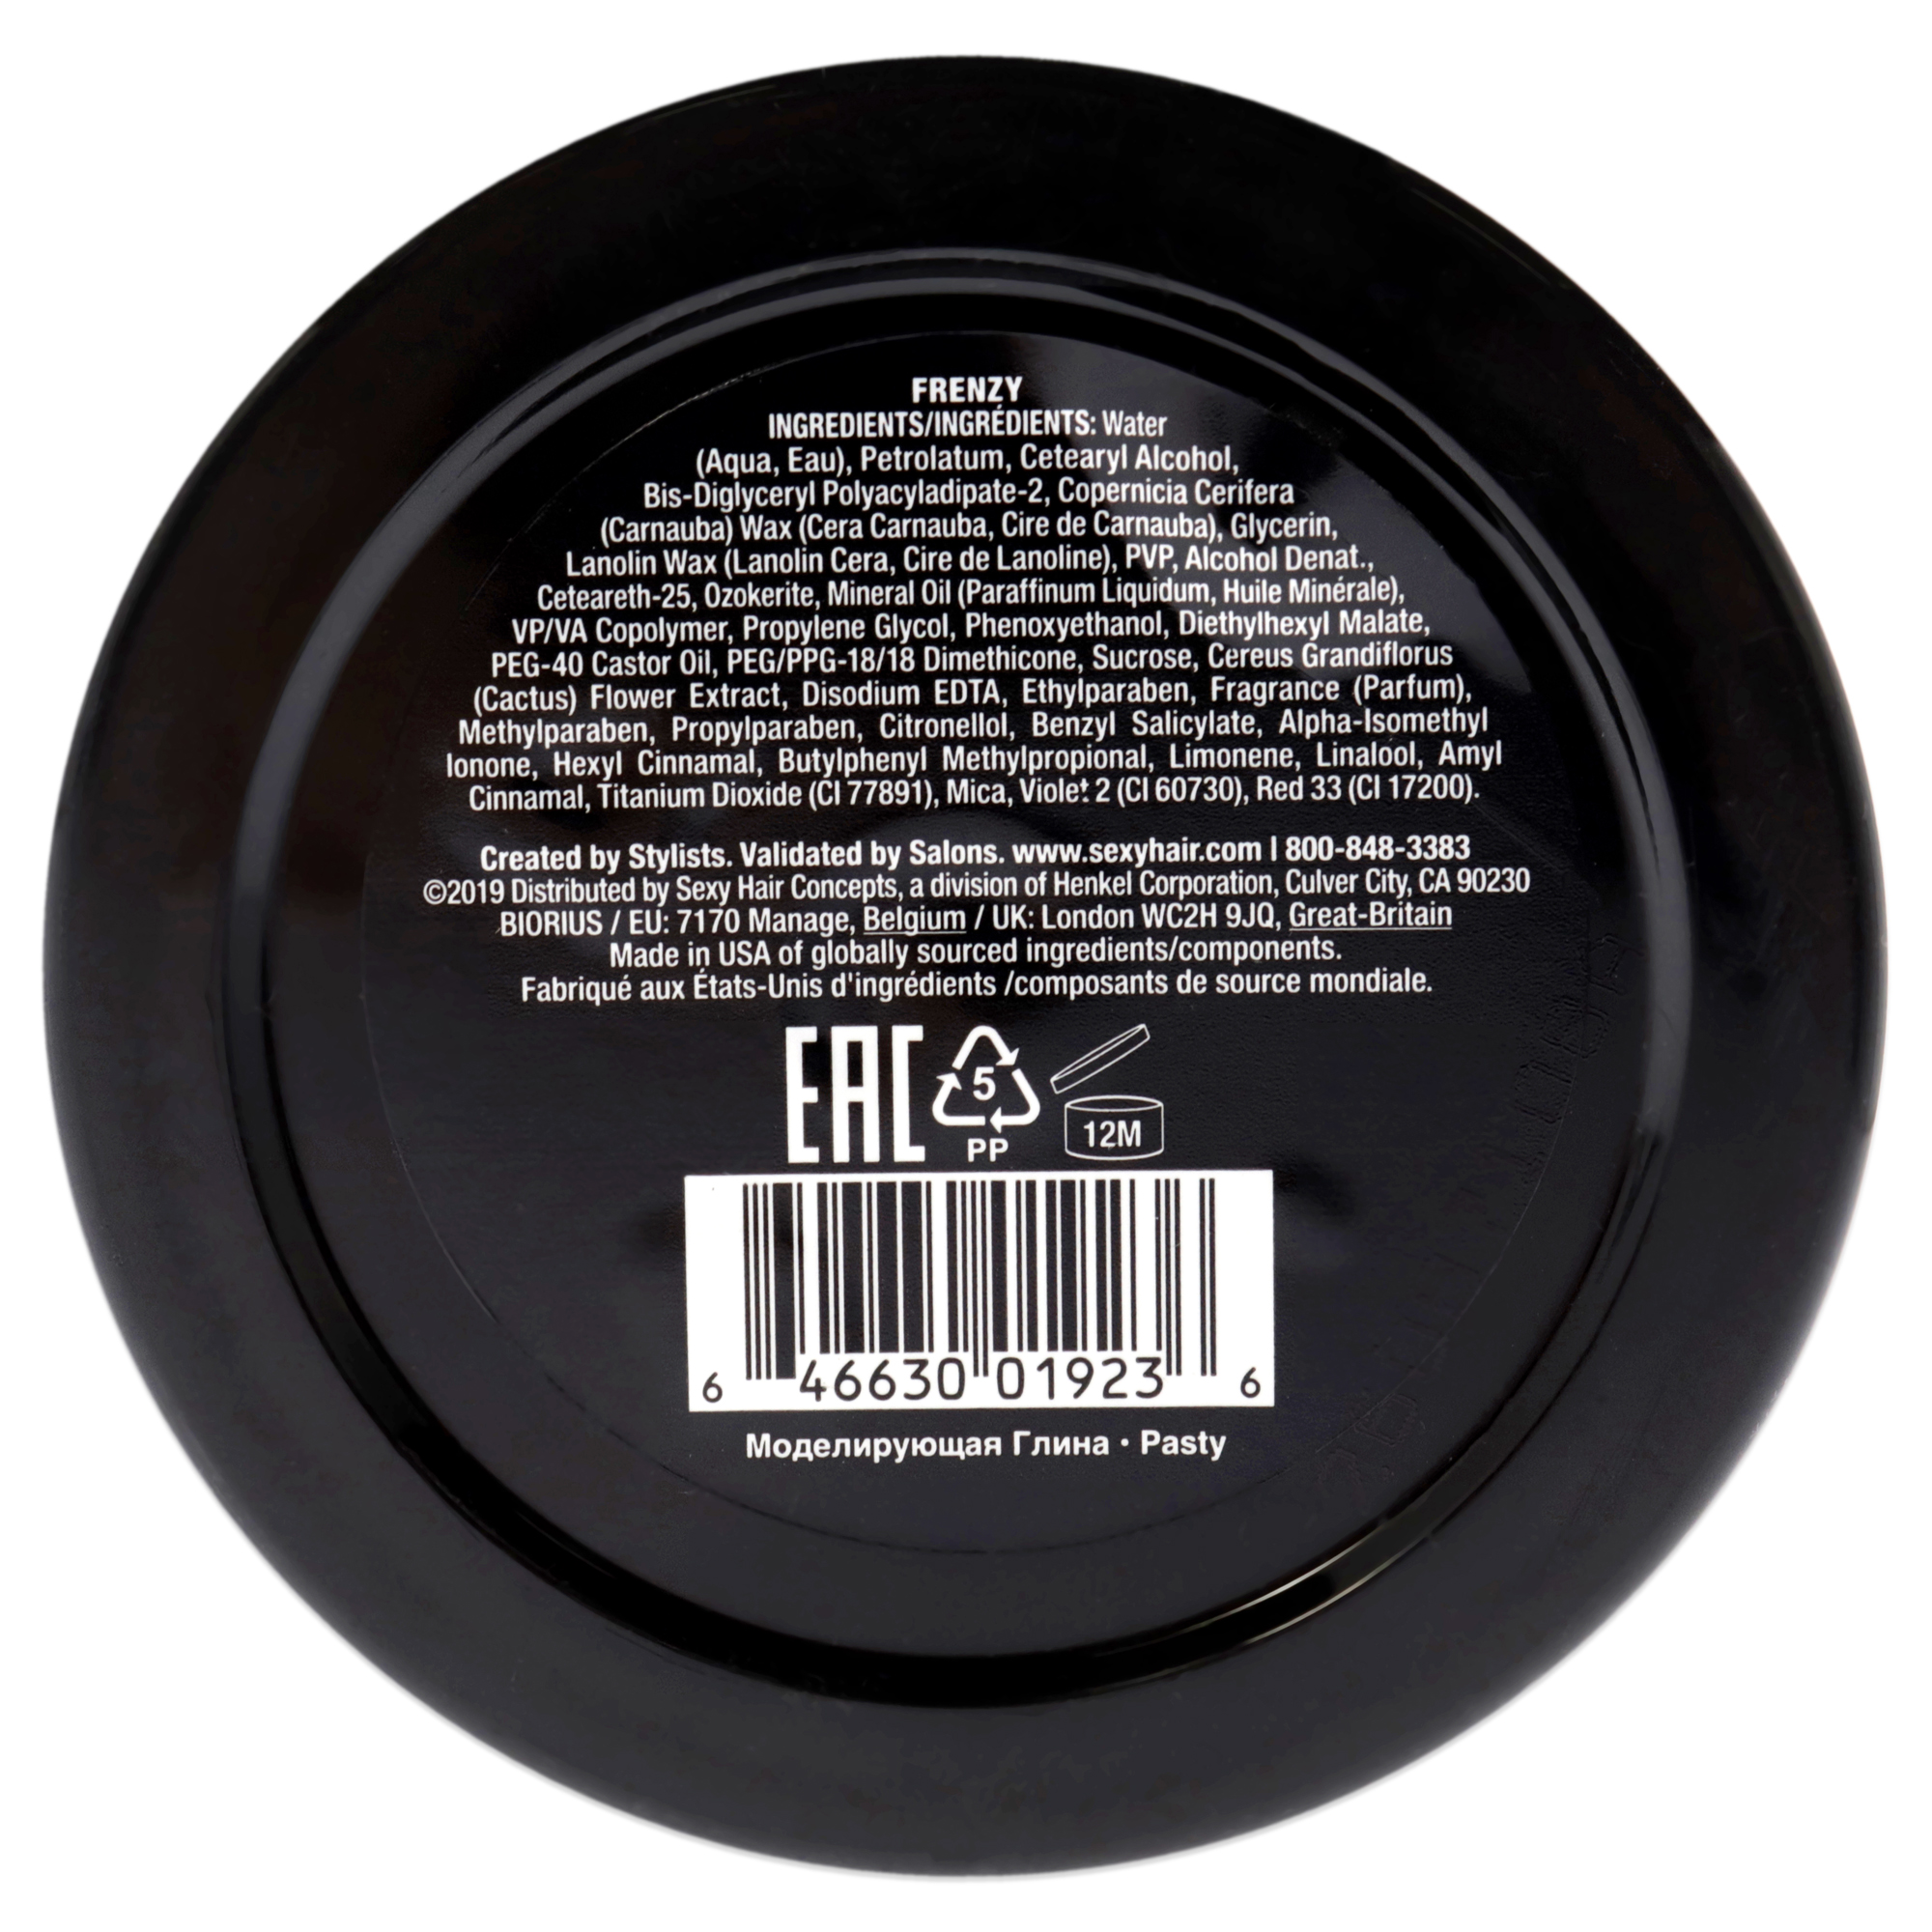 Style Sexy Hair Frenzy Matte Texturizing Paste, 2.5 oz - image 2 of 2